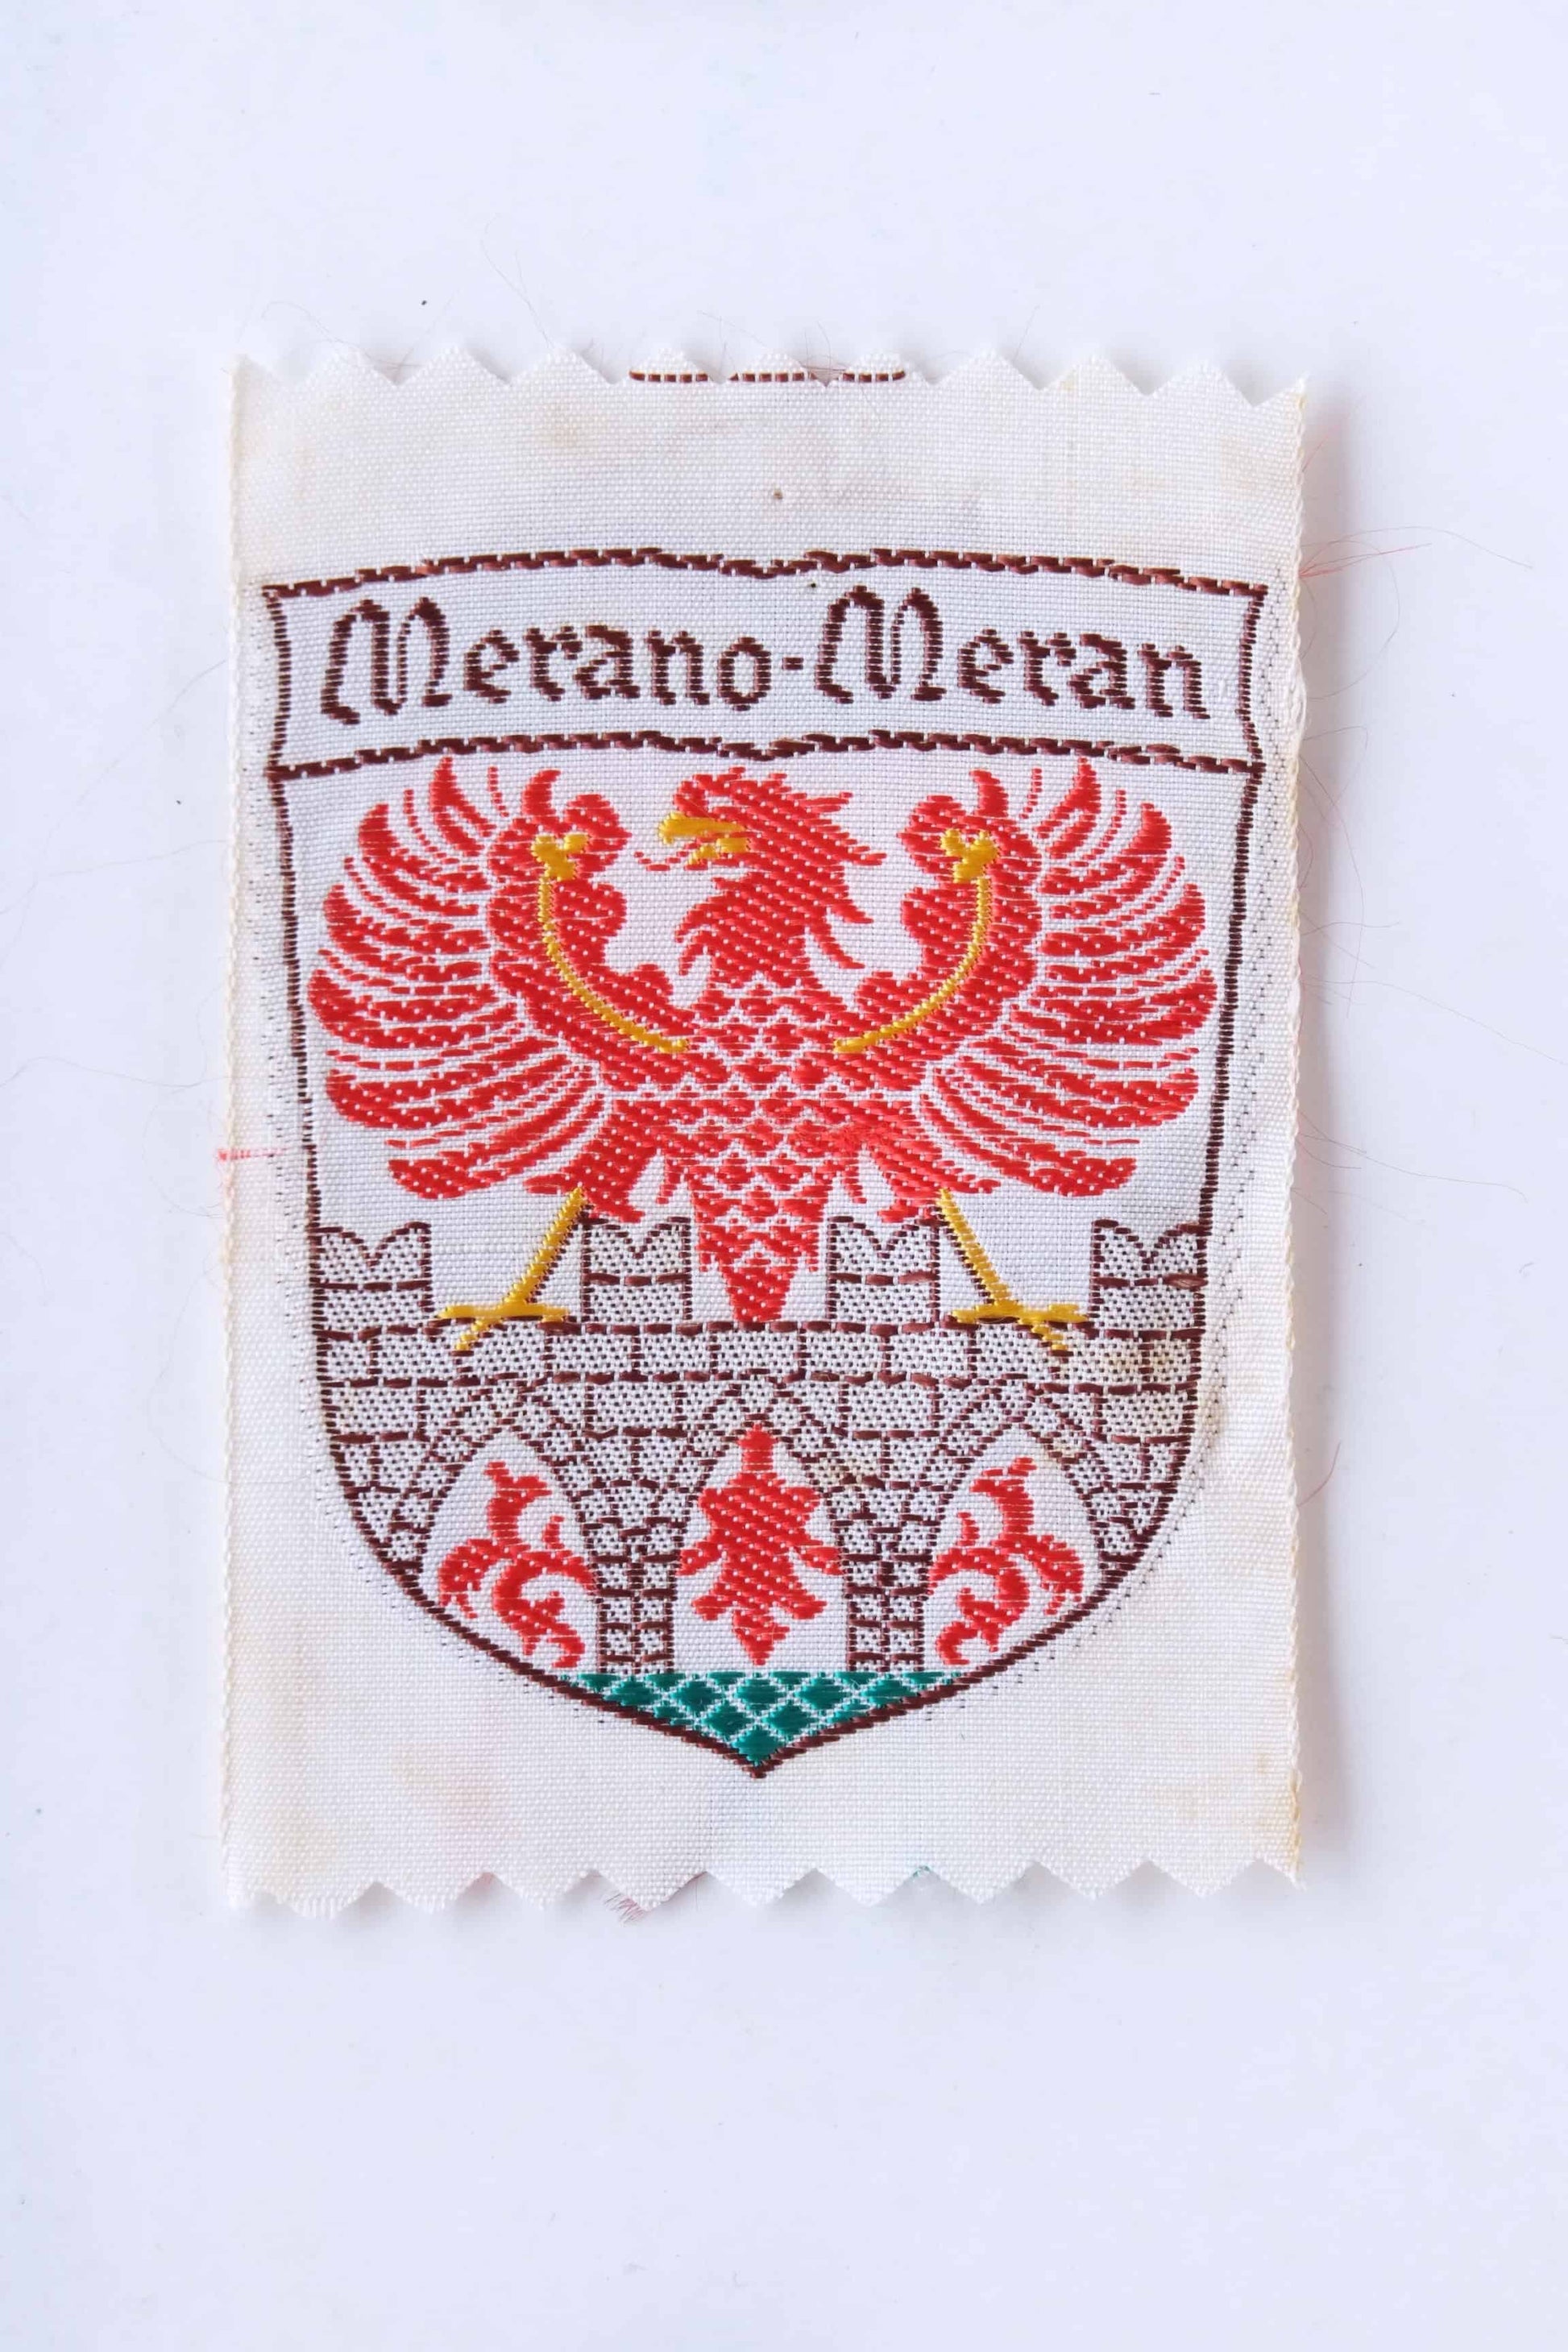 Vintage Merano Embroidered Patches